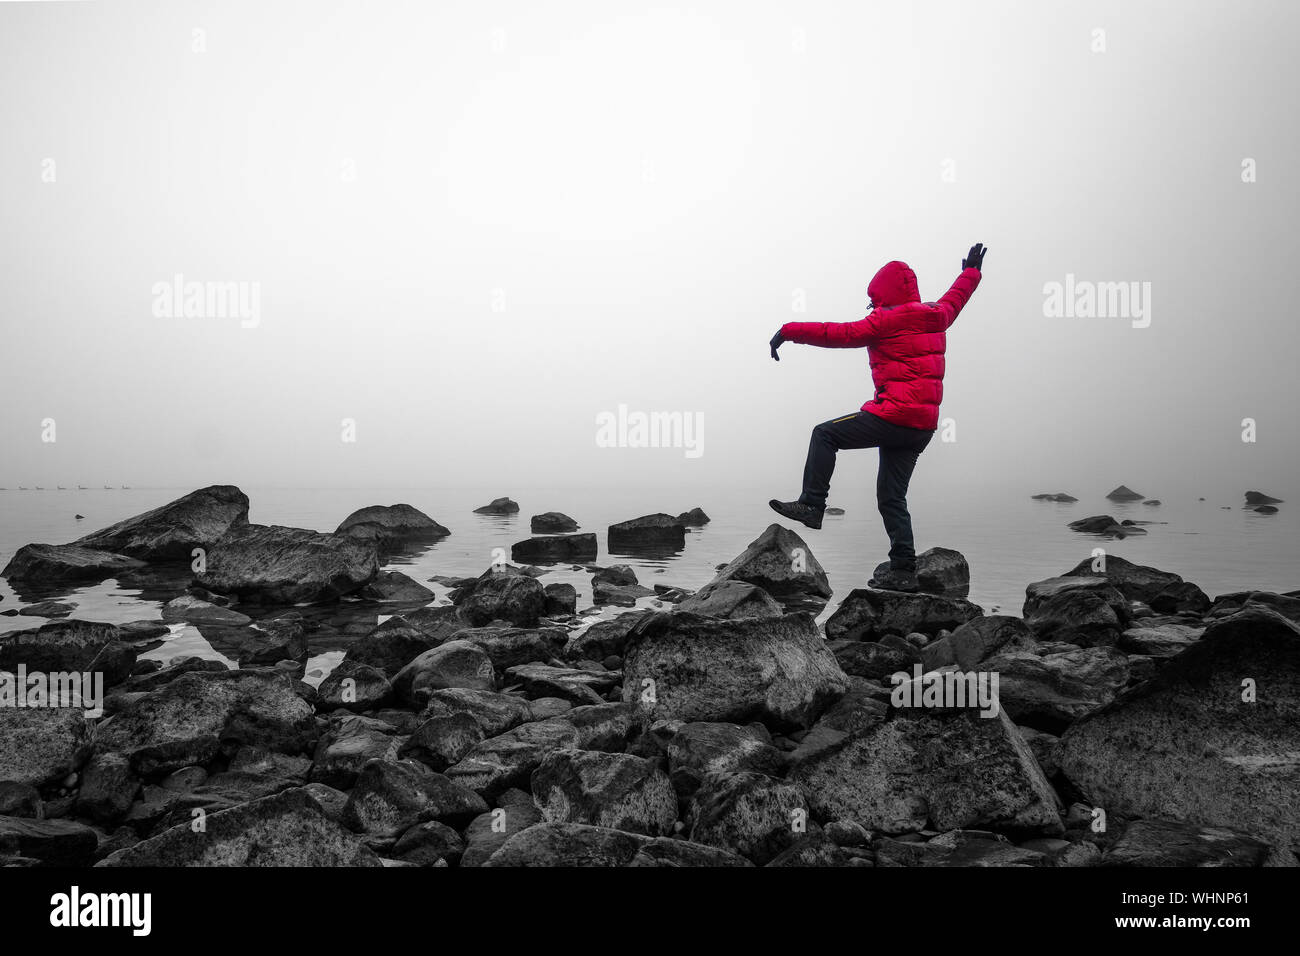 Rear View Full Length Of Playful Man In Parka On Rocks At Lakeshore During Foggy Weather Stock Photo